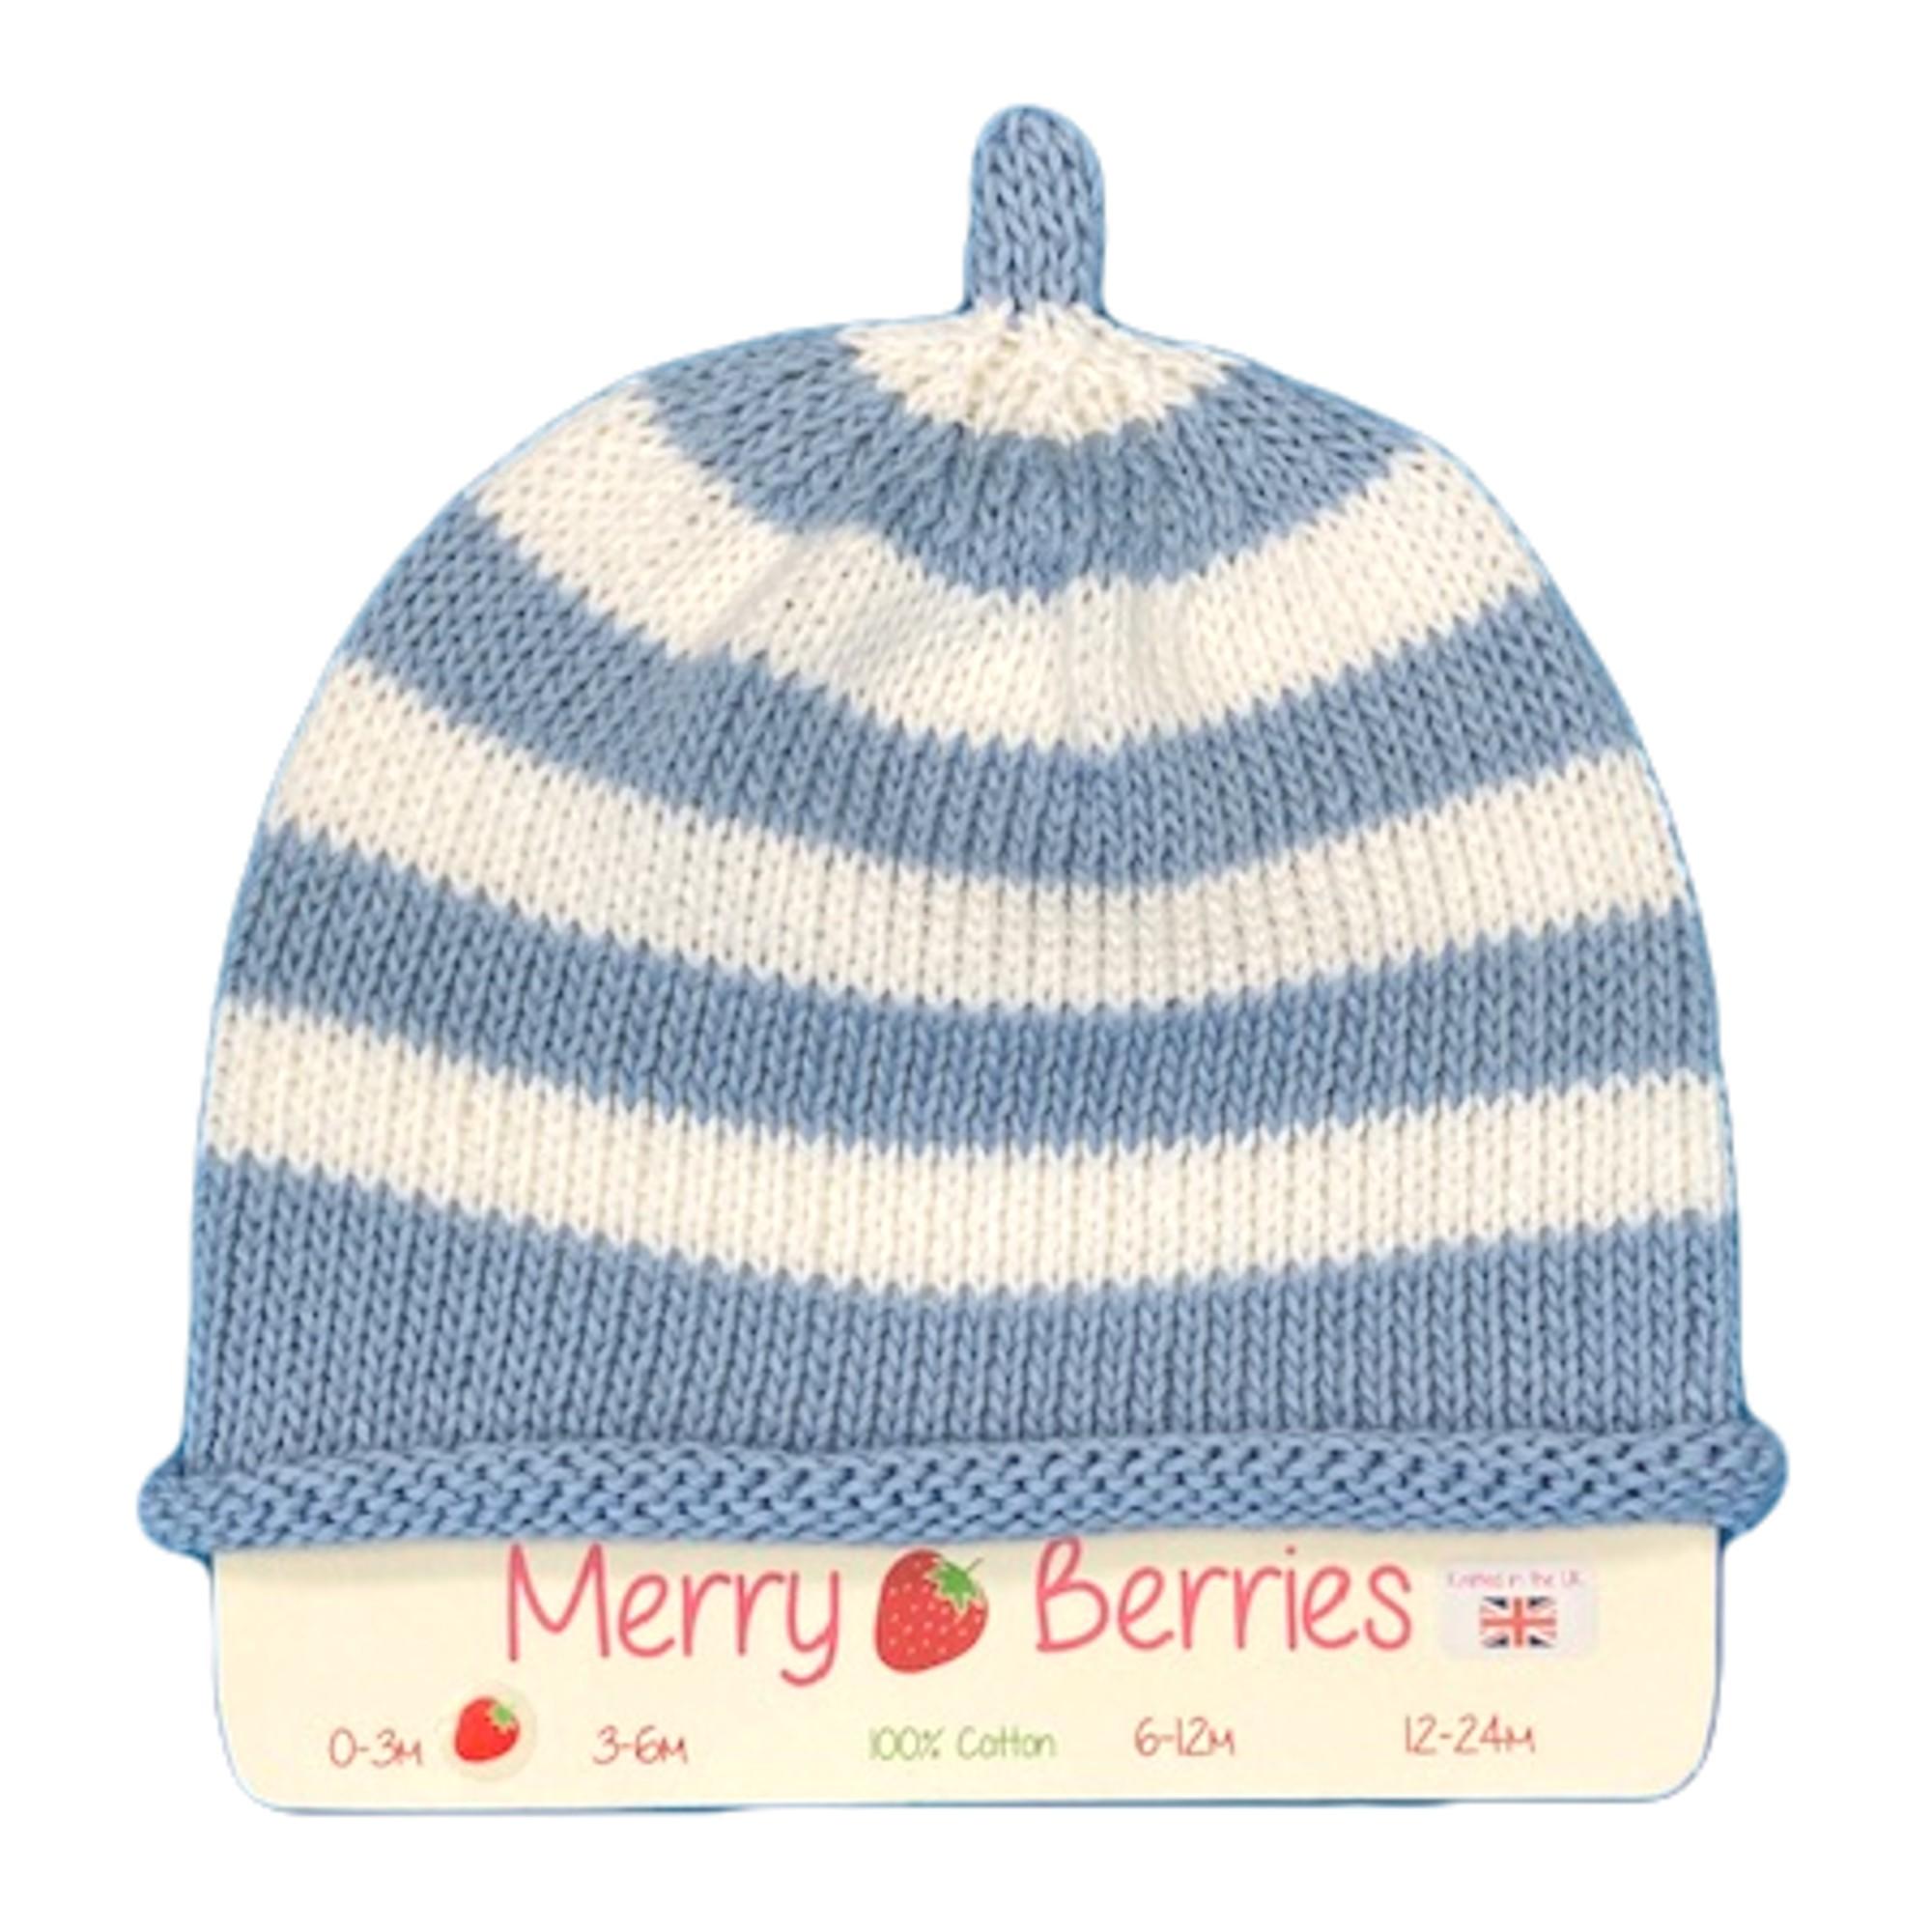 Merry Berries - Sky white striped Knitted baby Hat-0-24mths-Cotton